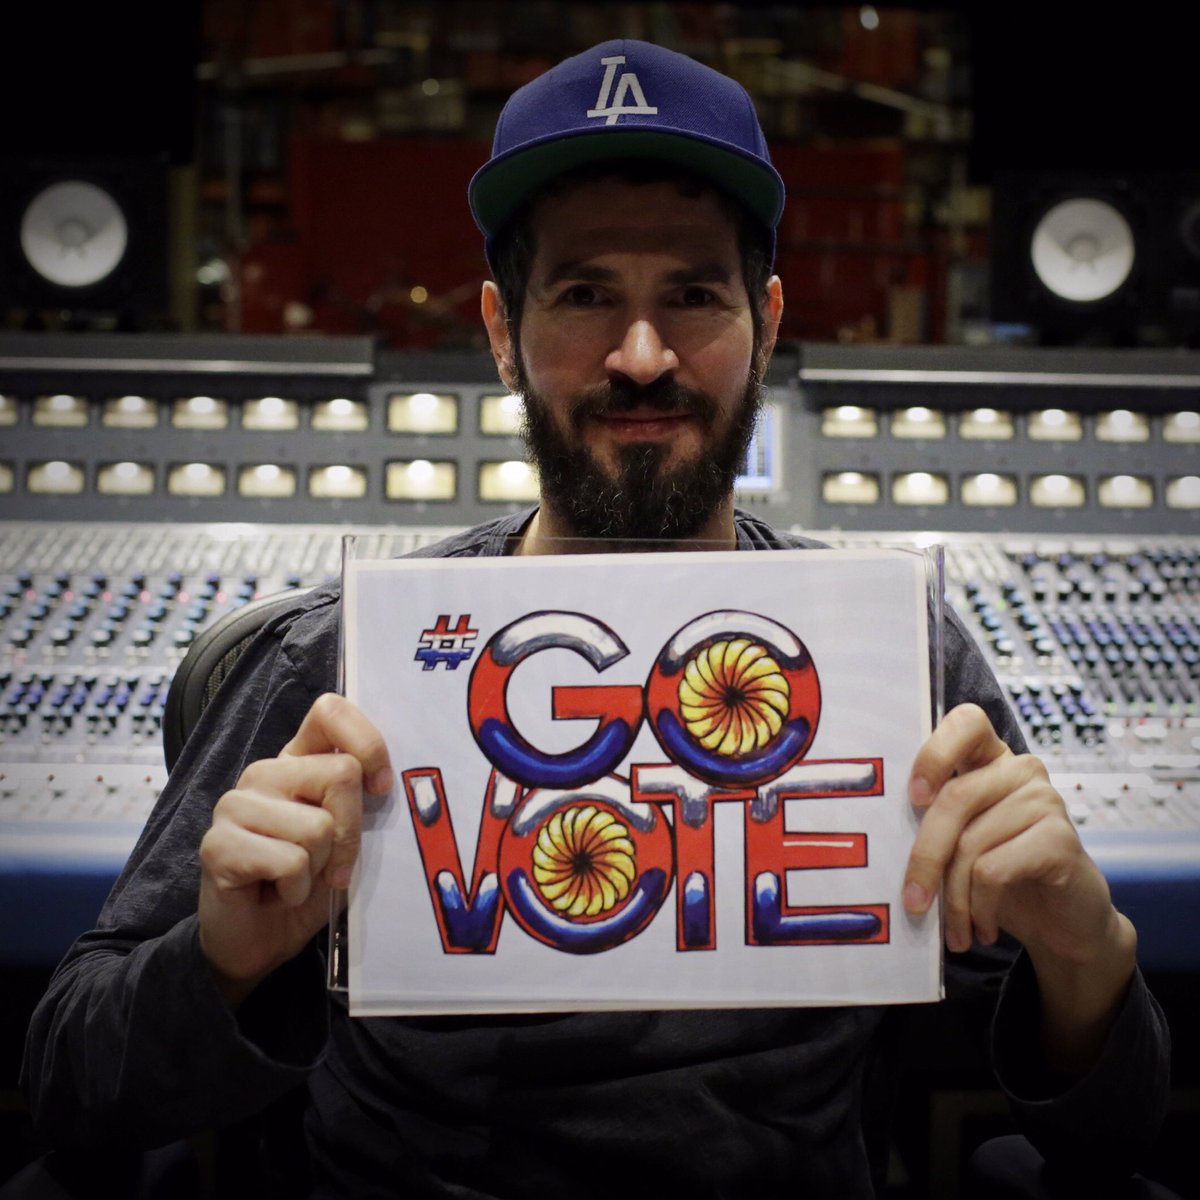 #GoVote tomorrow. For polling info, visit https://t.co/oHA2IHubjO https://t.co/7v1Cf34cQ7